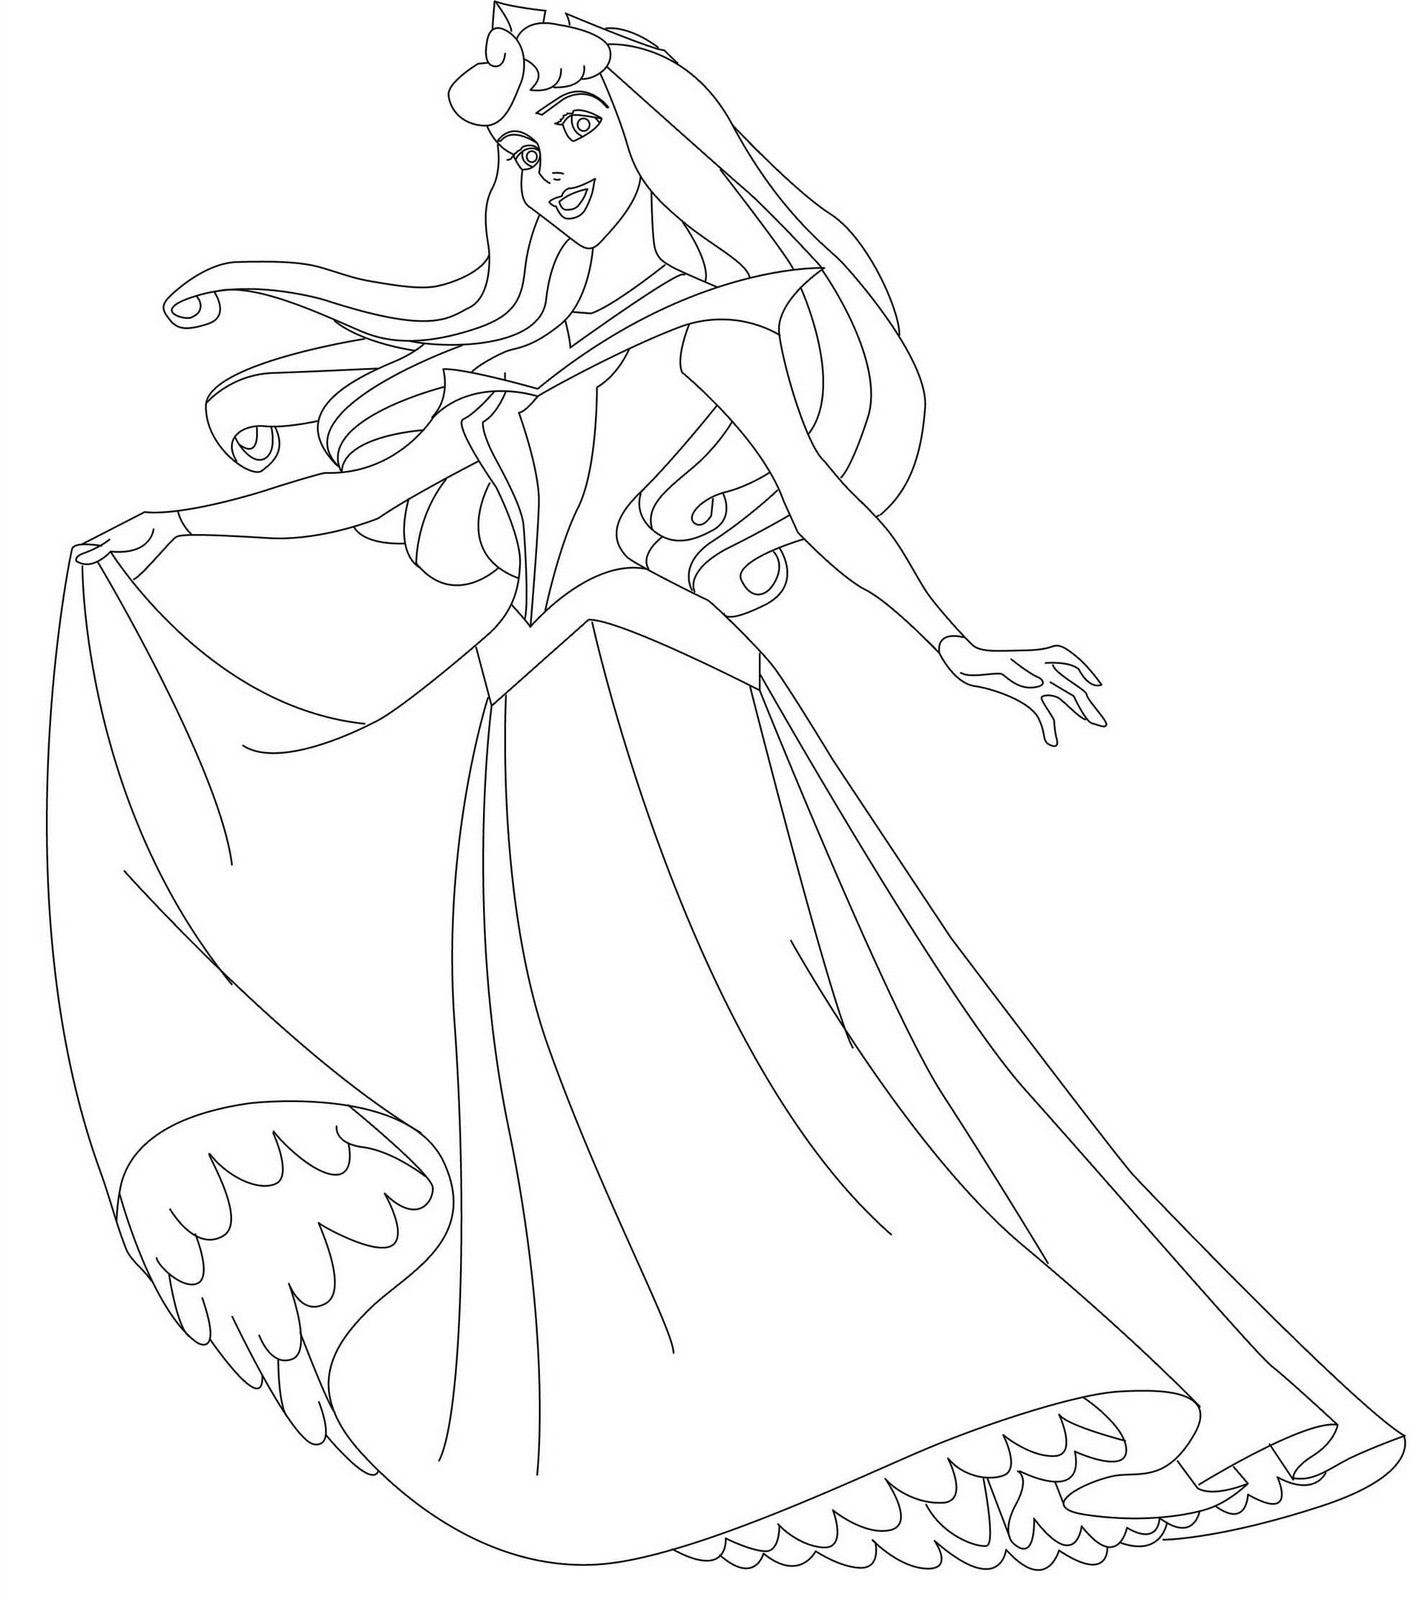 Coloring Book Pages Disney Princess
 Free Printable Disney Princess Coloring Pages For Kids